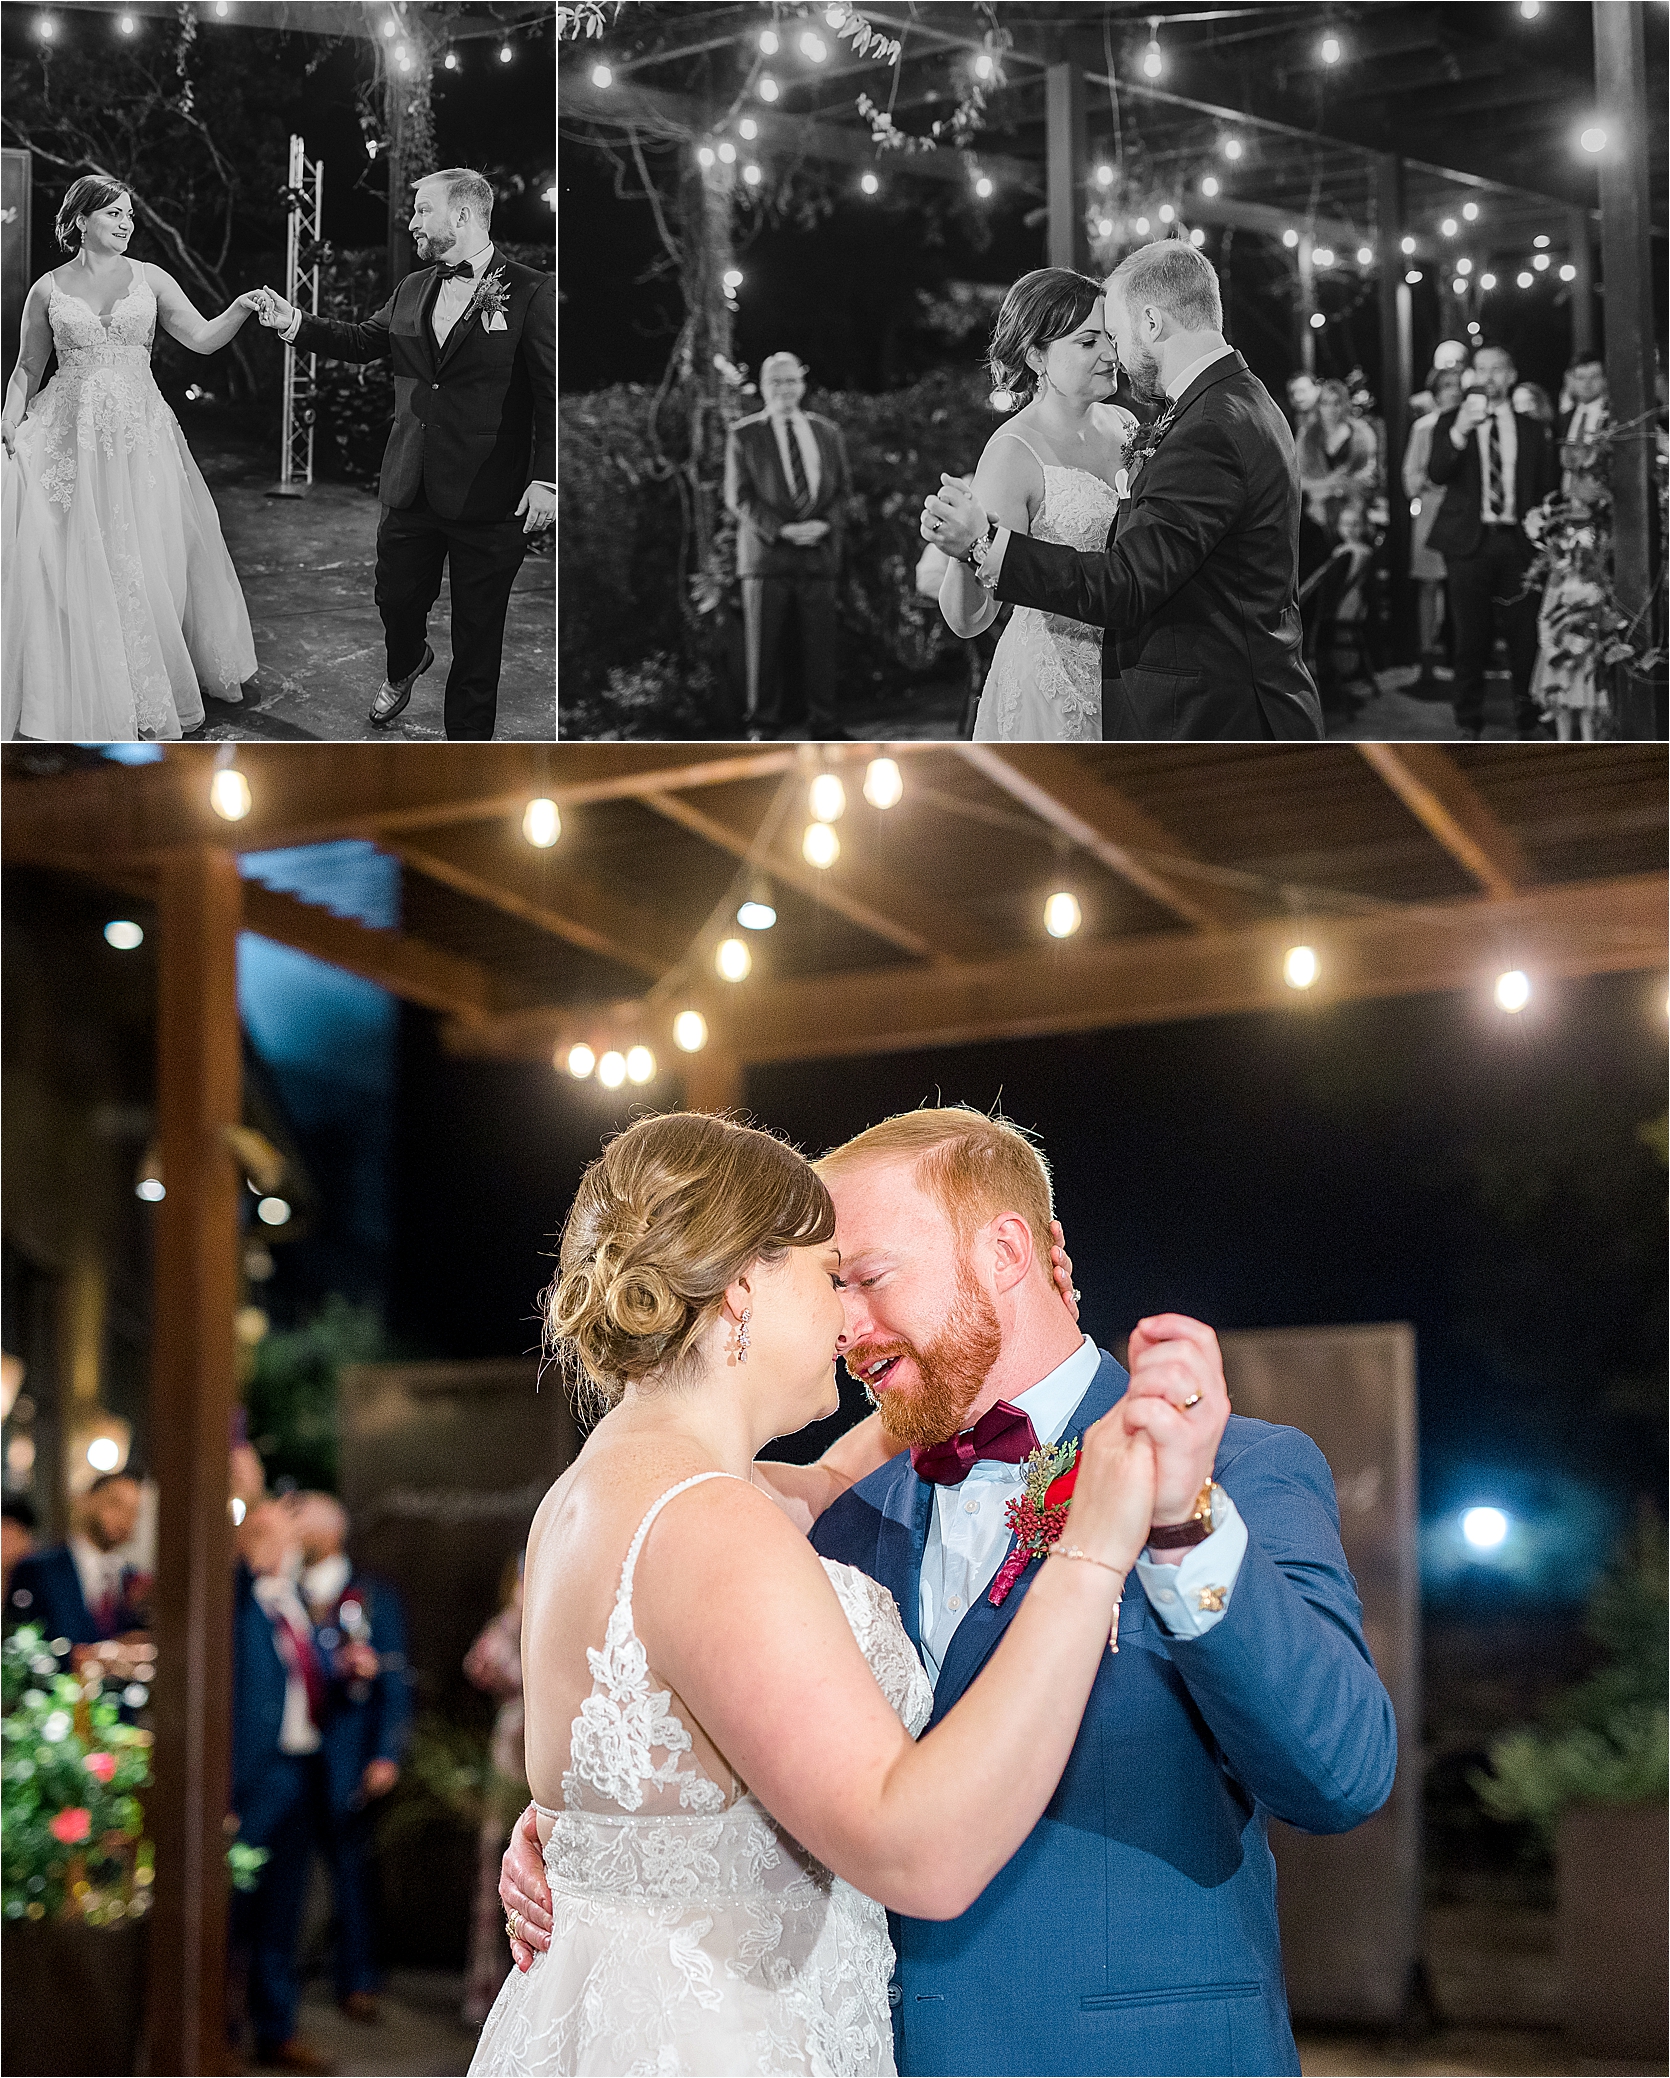 A final dance under twinkle lights shared by a bride and groom during their Paesanos 1604 Wedding Reception in San Antonio, Texas